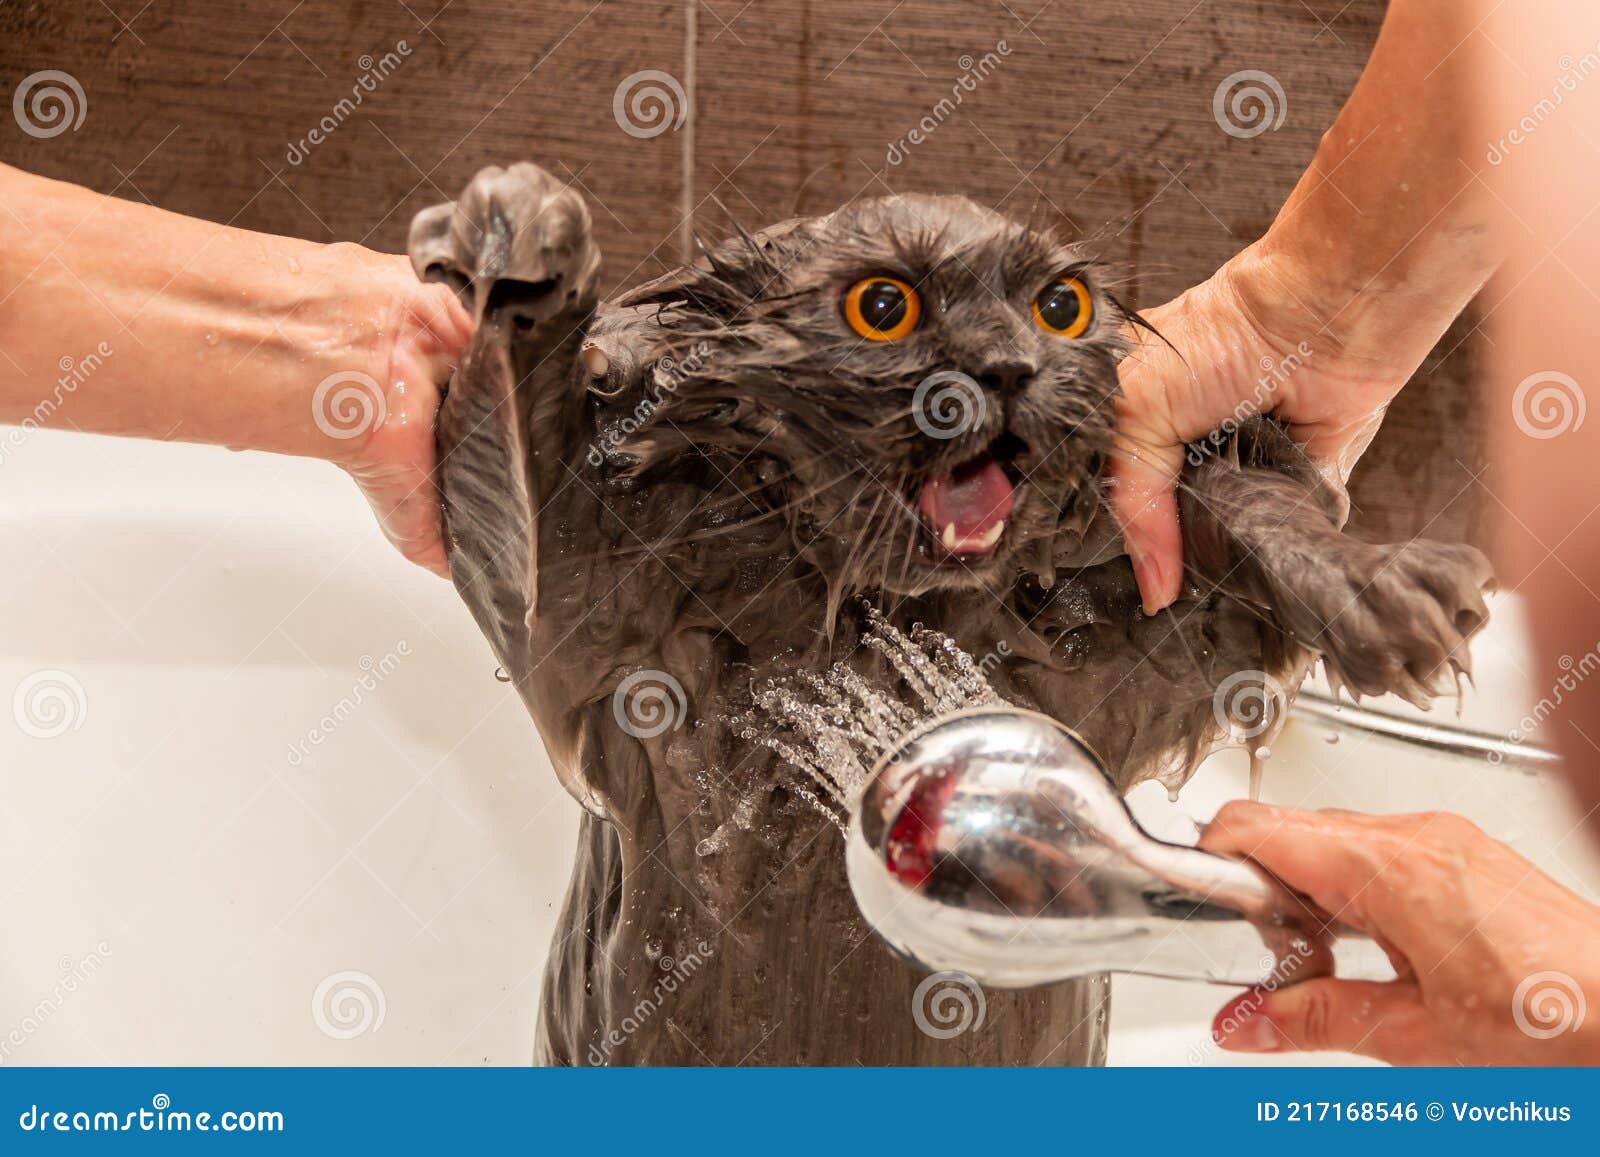 https://thumbs.dreamstime.com/z/funny-wet-british-cat-bright-orange-eyes-open-mouth-protruding-tongue-takes-shower-pet-hygiene-concept-angry-217168546.jpg